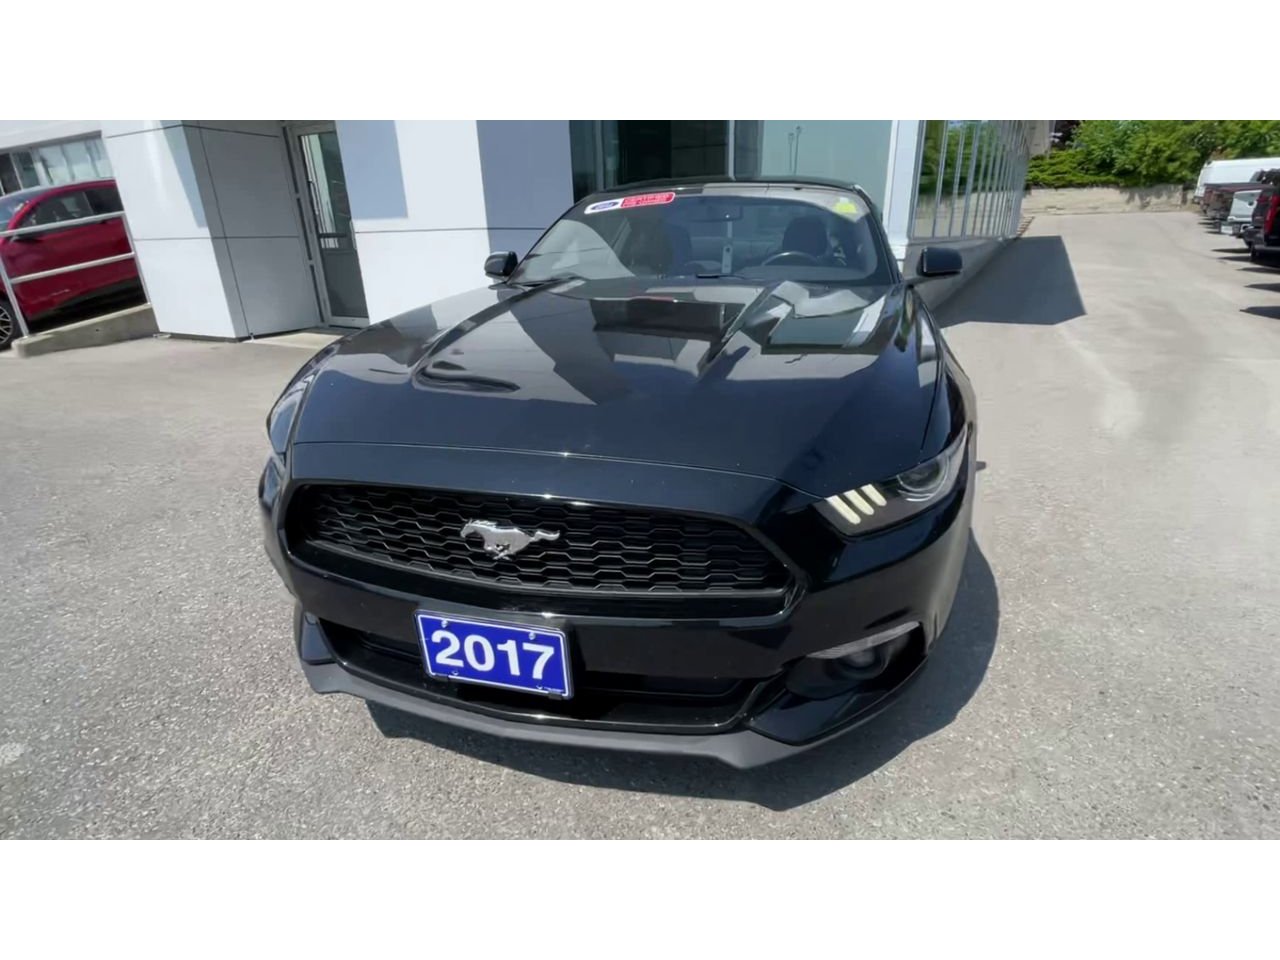 2017 Ford Mustang V6 - 20997A Mobile Image 2